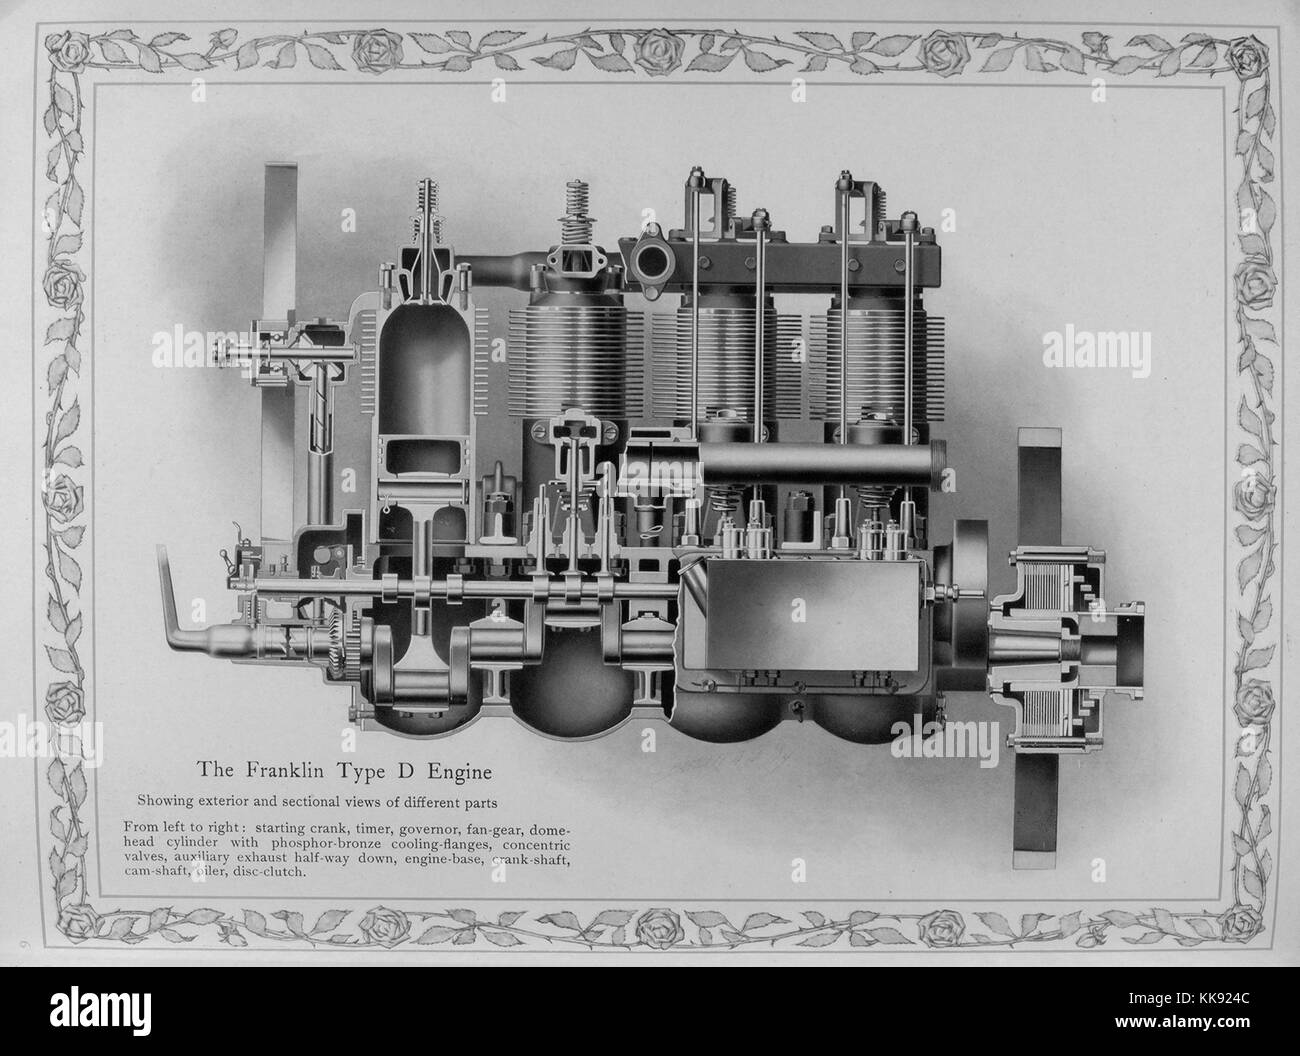 Detailed illustration of the engine for the Franklin Type D car, captioned 'The Franklin Type D Engine, Showing exterior and sectional views of different parts', by The HH Franklin Manufacturing Company of Syracuse, New York, 1908. From the New York Public Library. Stock Photo